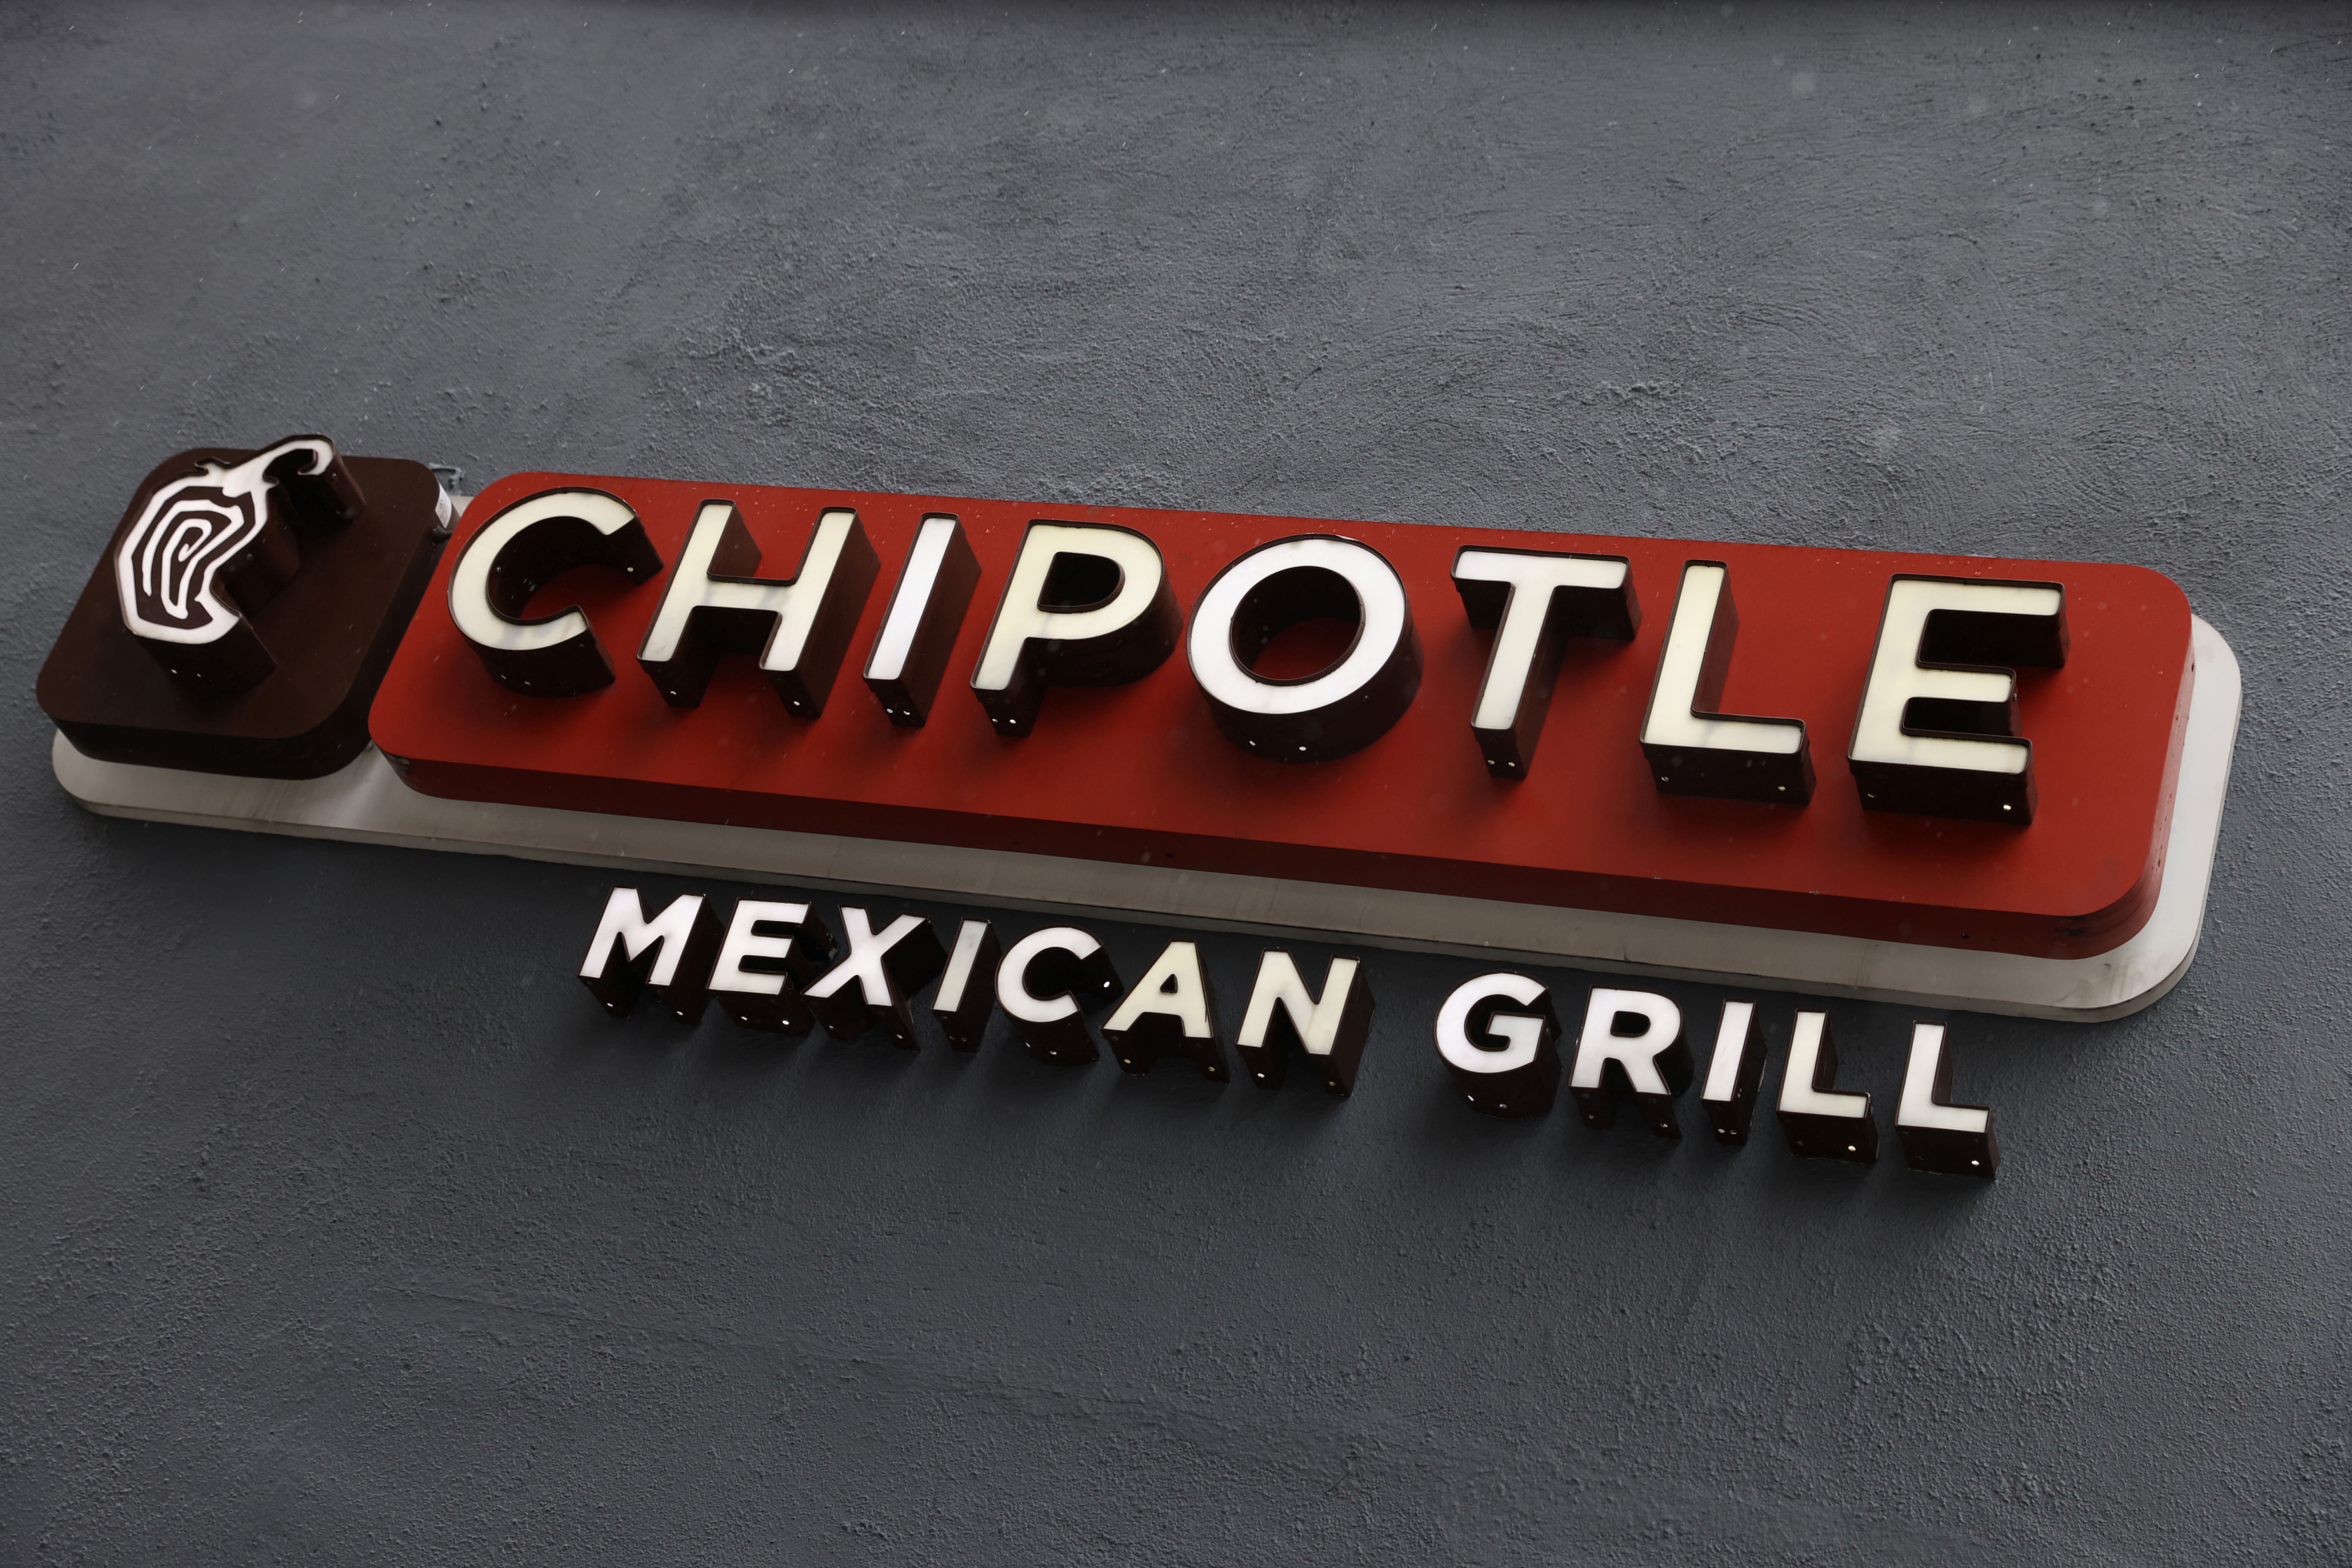 Stocks moving in after-hours: Chipotle, VF Corp, Fortinet, Enphase Energy